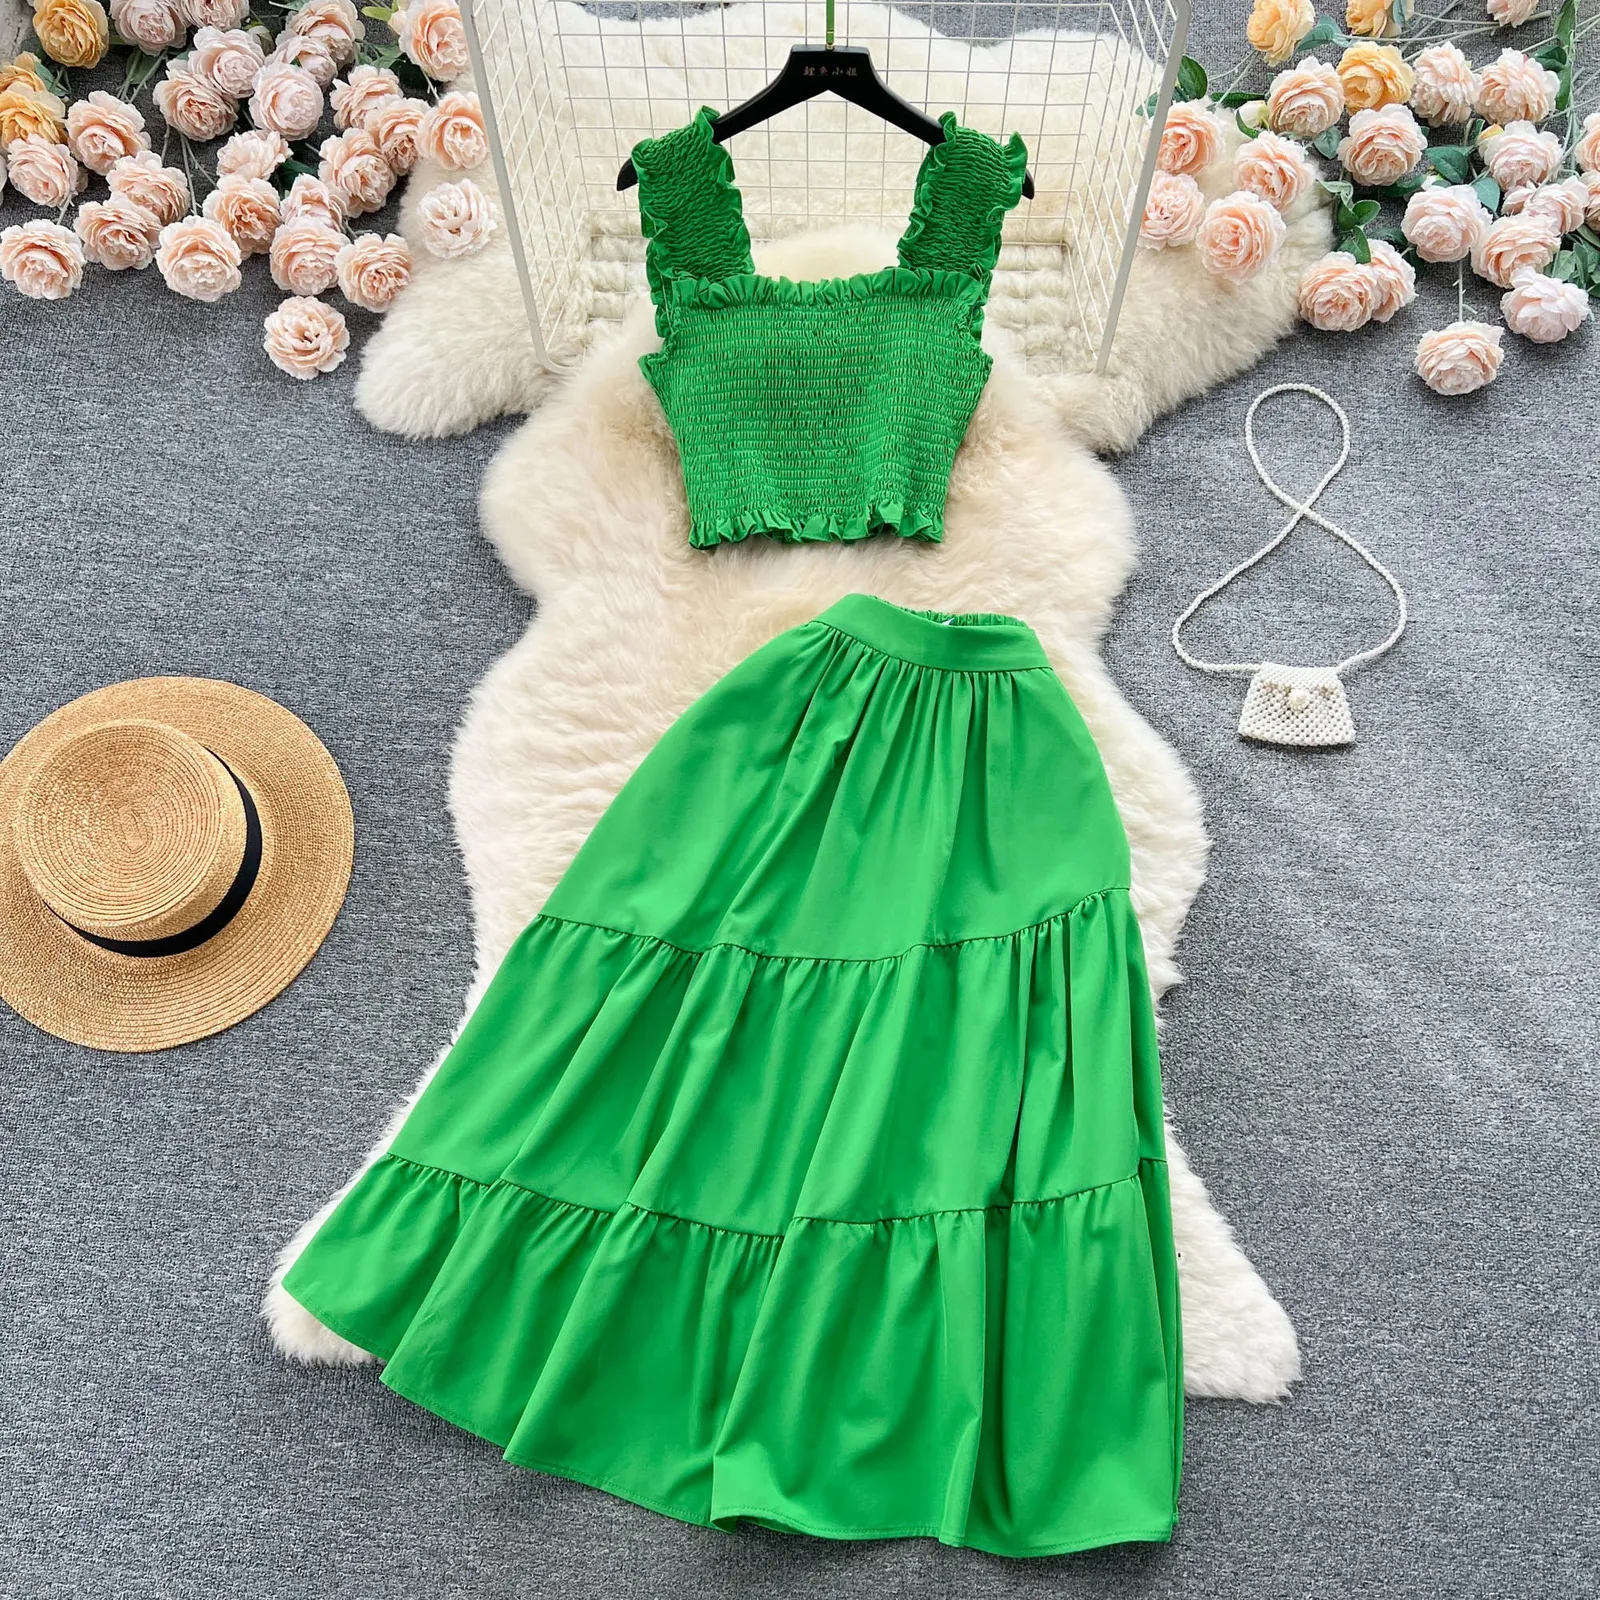 YuooMuoo Chic Fashion Women Dress Suits Summer Vacation Style Sleeveless Stretchy Tops High Waist Long Skirts Lady Outfits 240329